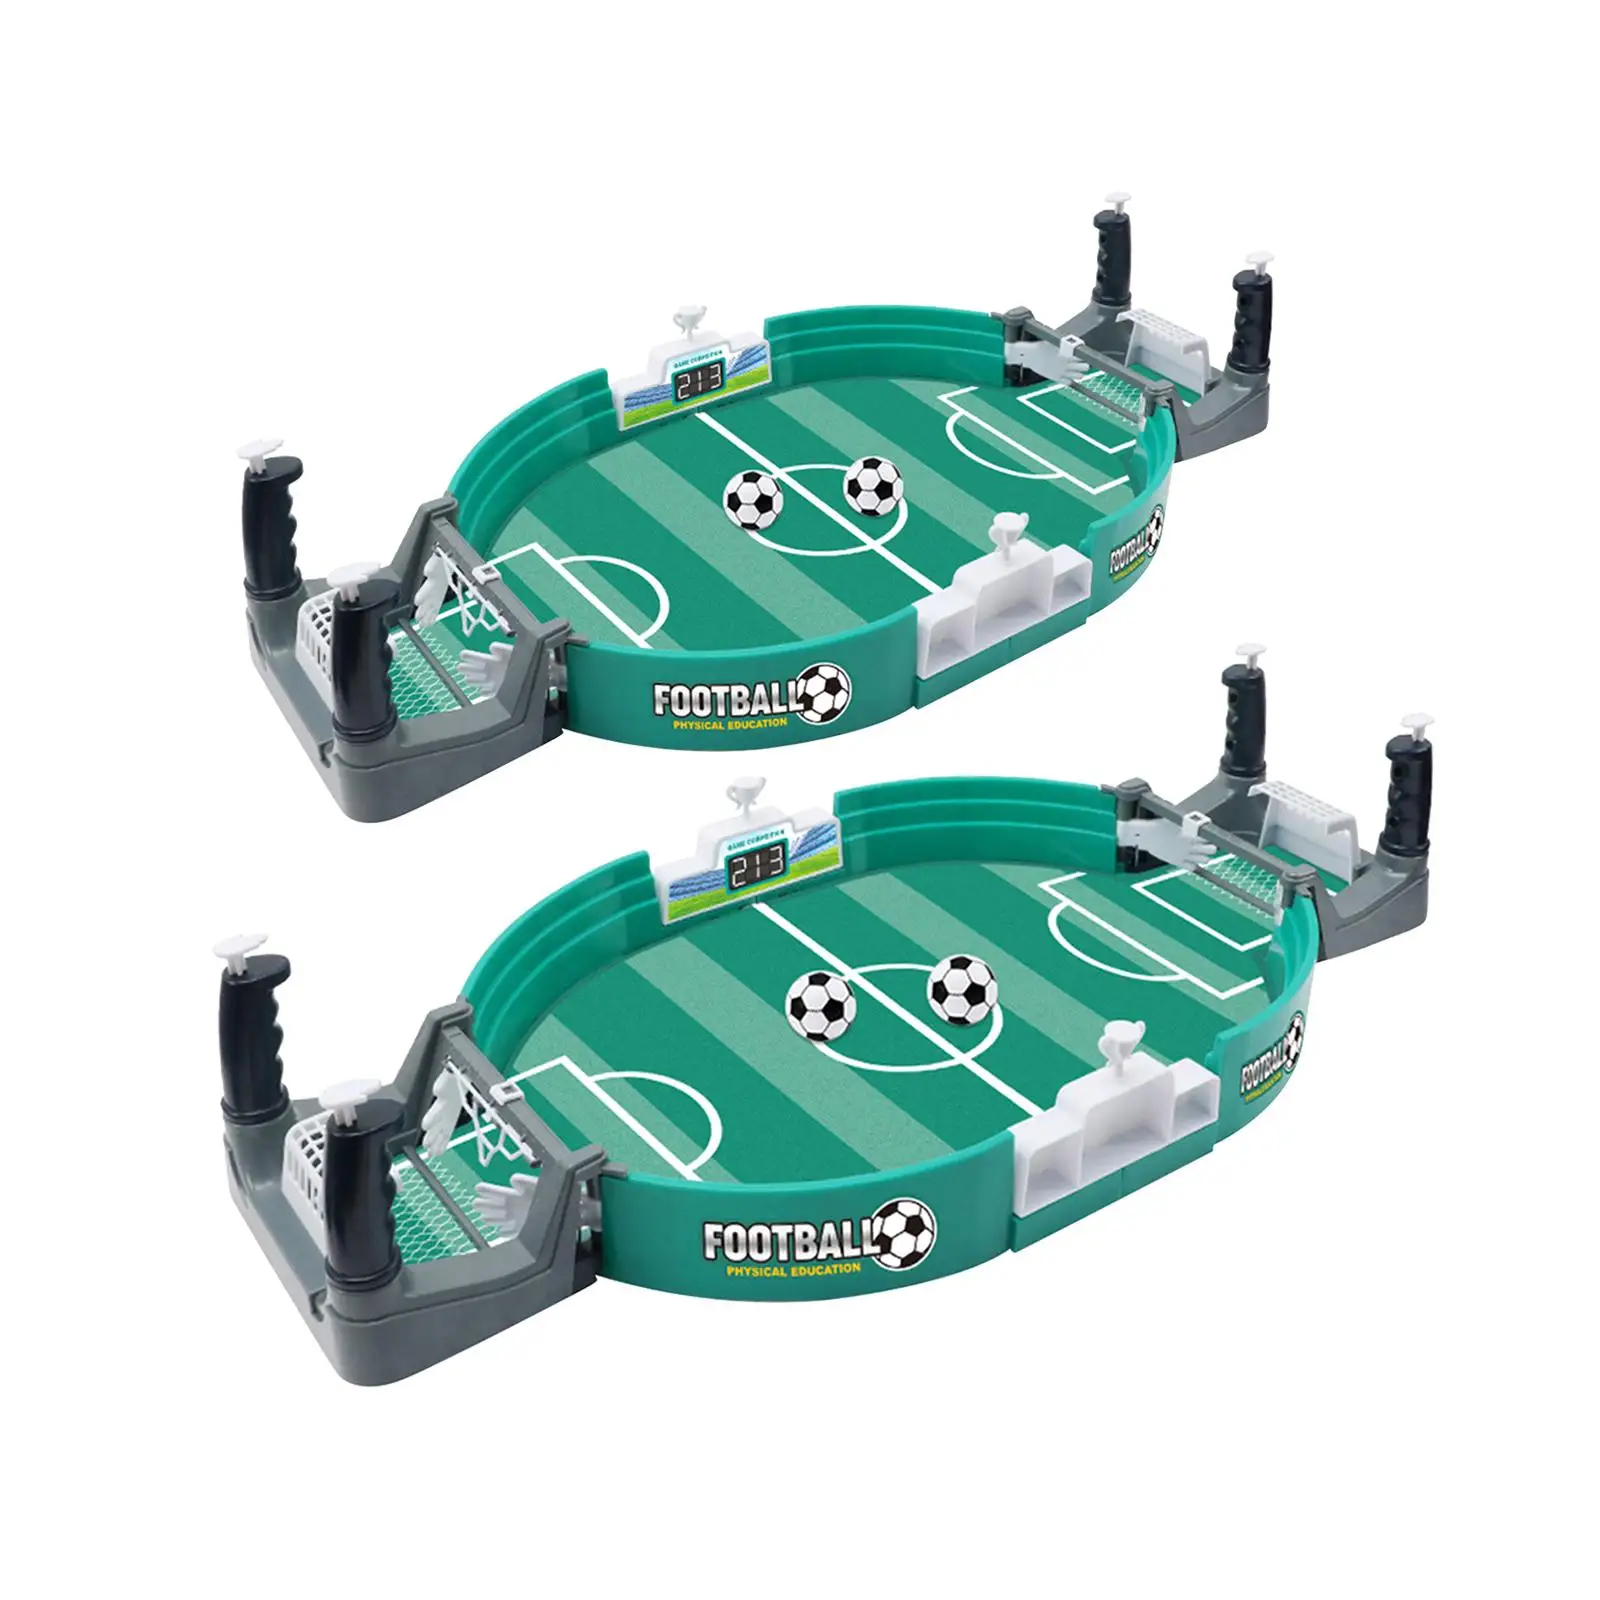 Football Board Game Interactive Toy Soccer Tabletop Game for Family Party